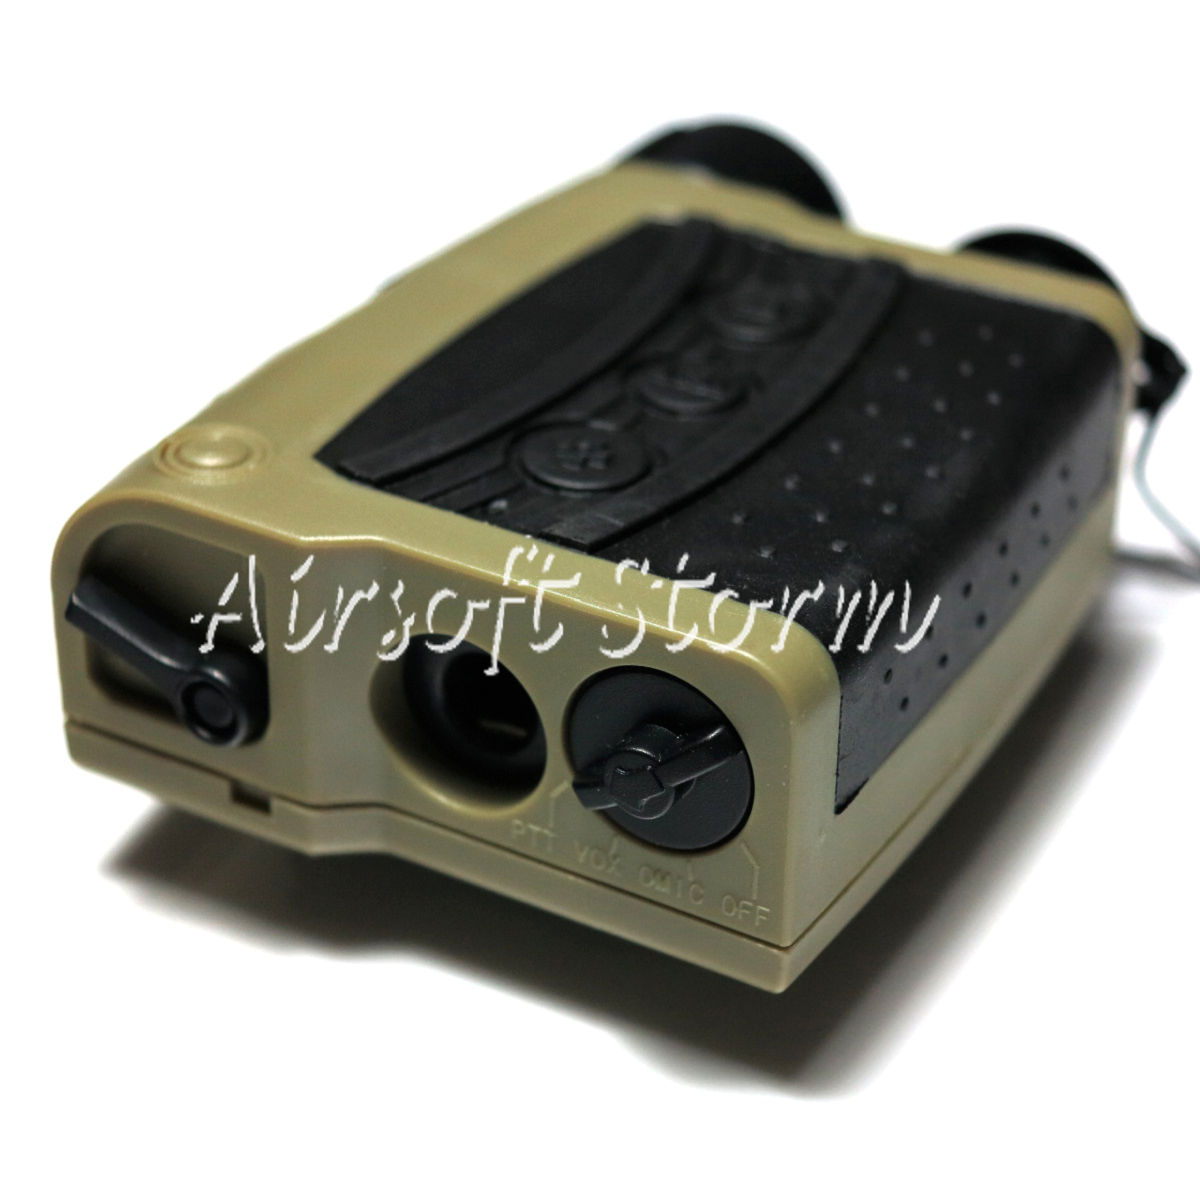 Airsoft SWAT Communications Gear Z Tactical ZQUIET PRO PTT & Wire for Midland 2-pin Radio